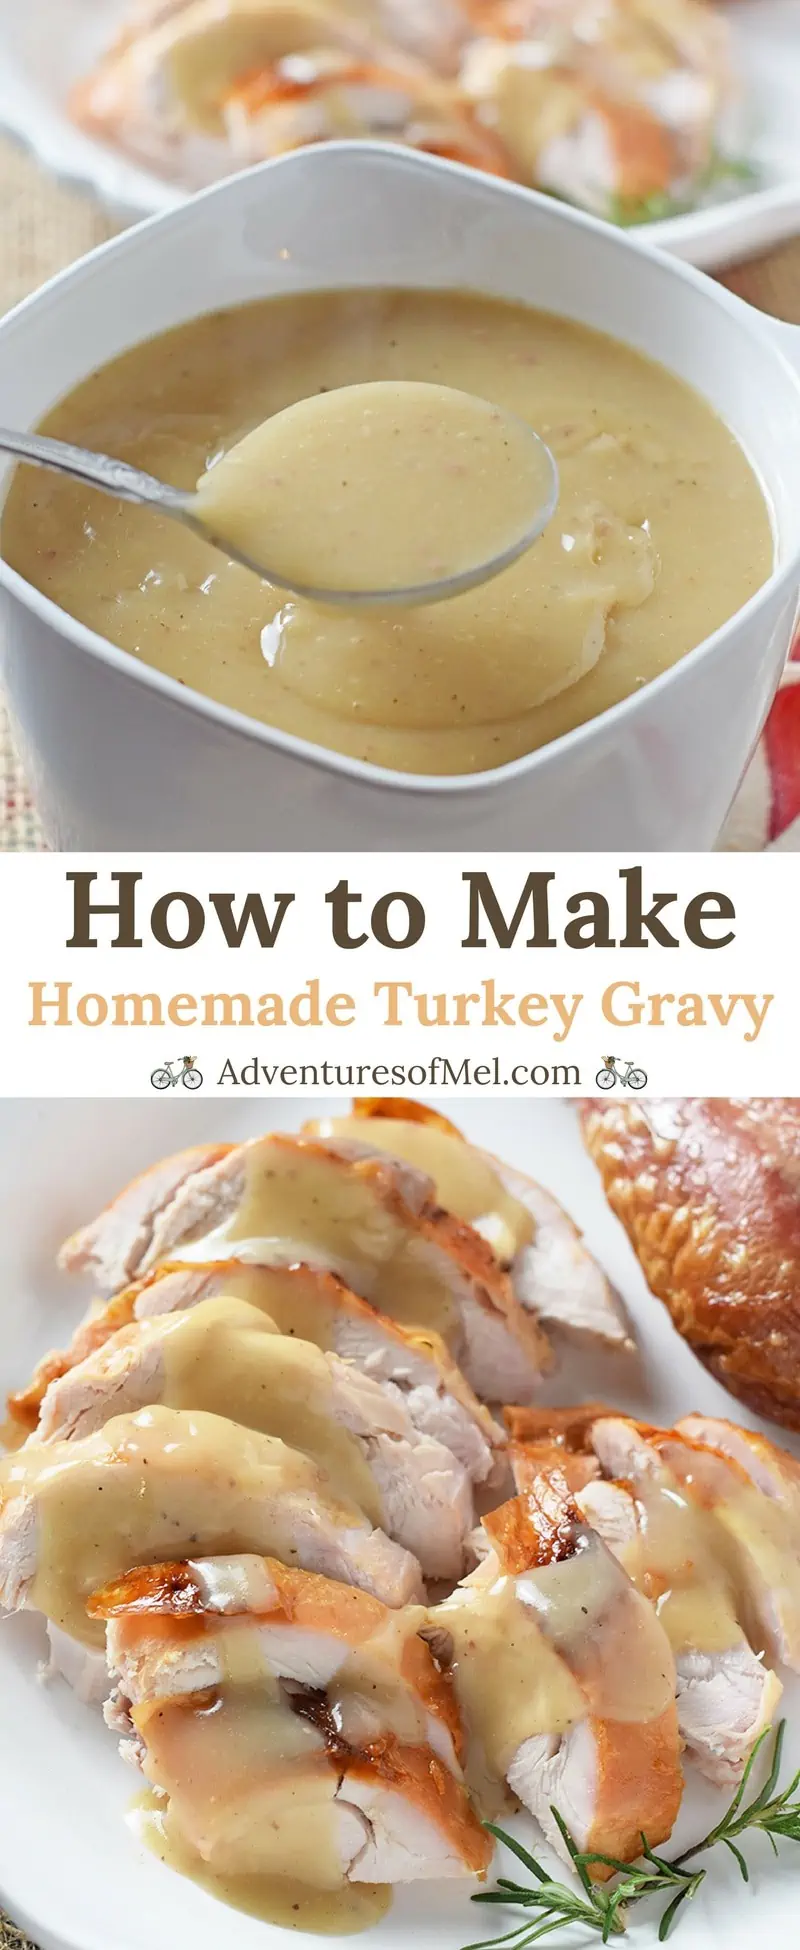 Homemade Turkey Gravy, made with leftover turkey drippings and neck broth. Delicious side dish with turkey, mashed potatoes, and all the fixings!